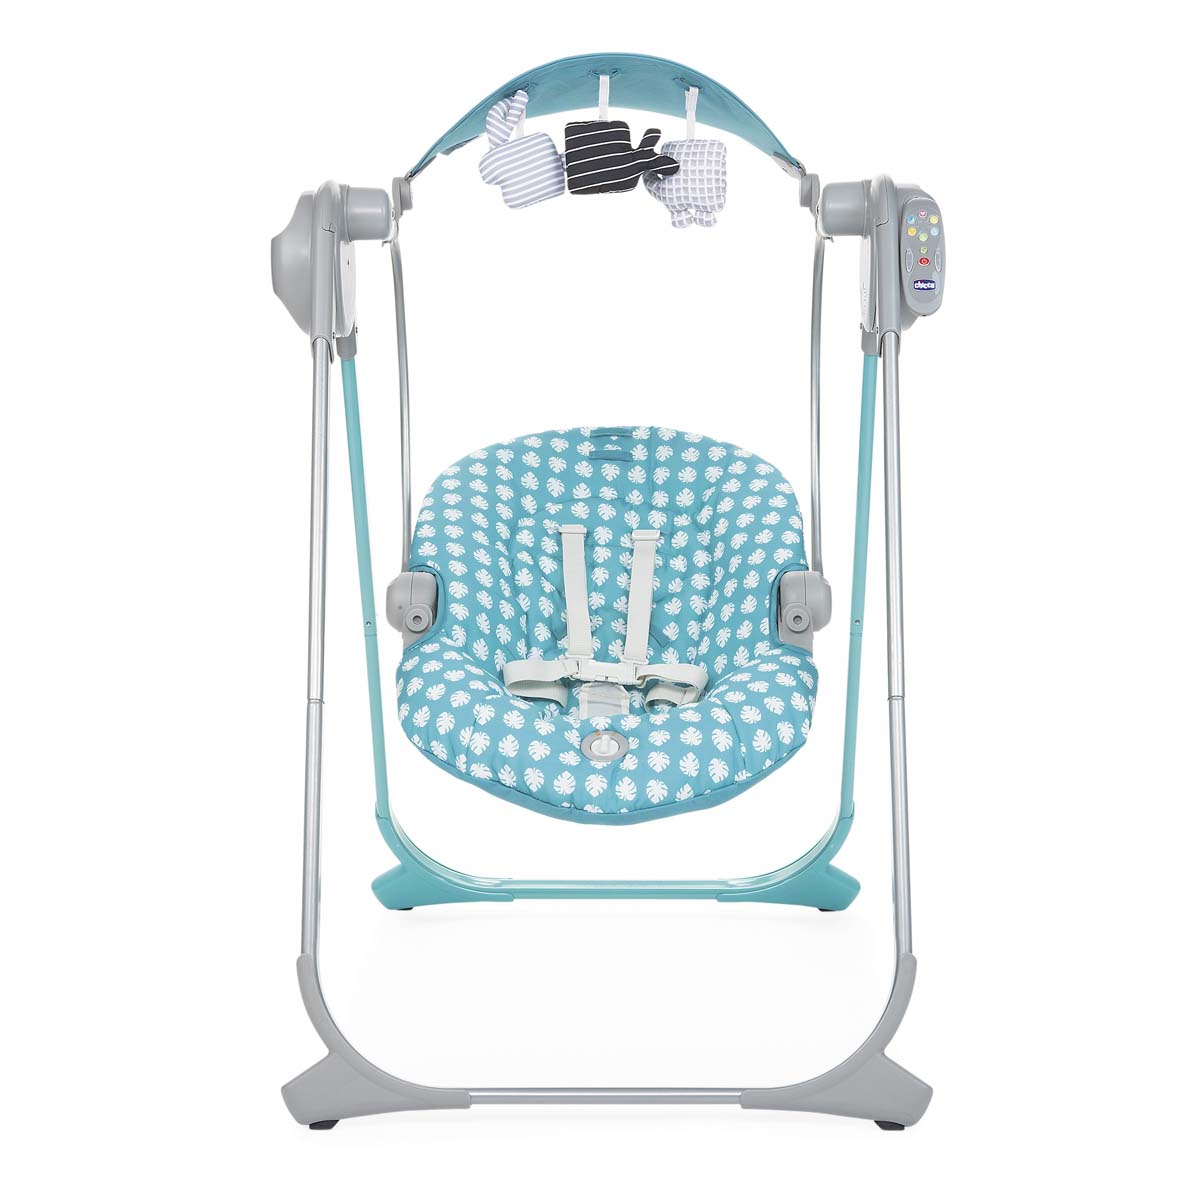 Altalena polly swing up turquoise - Chicco